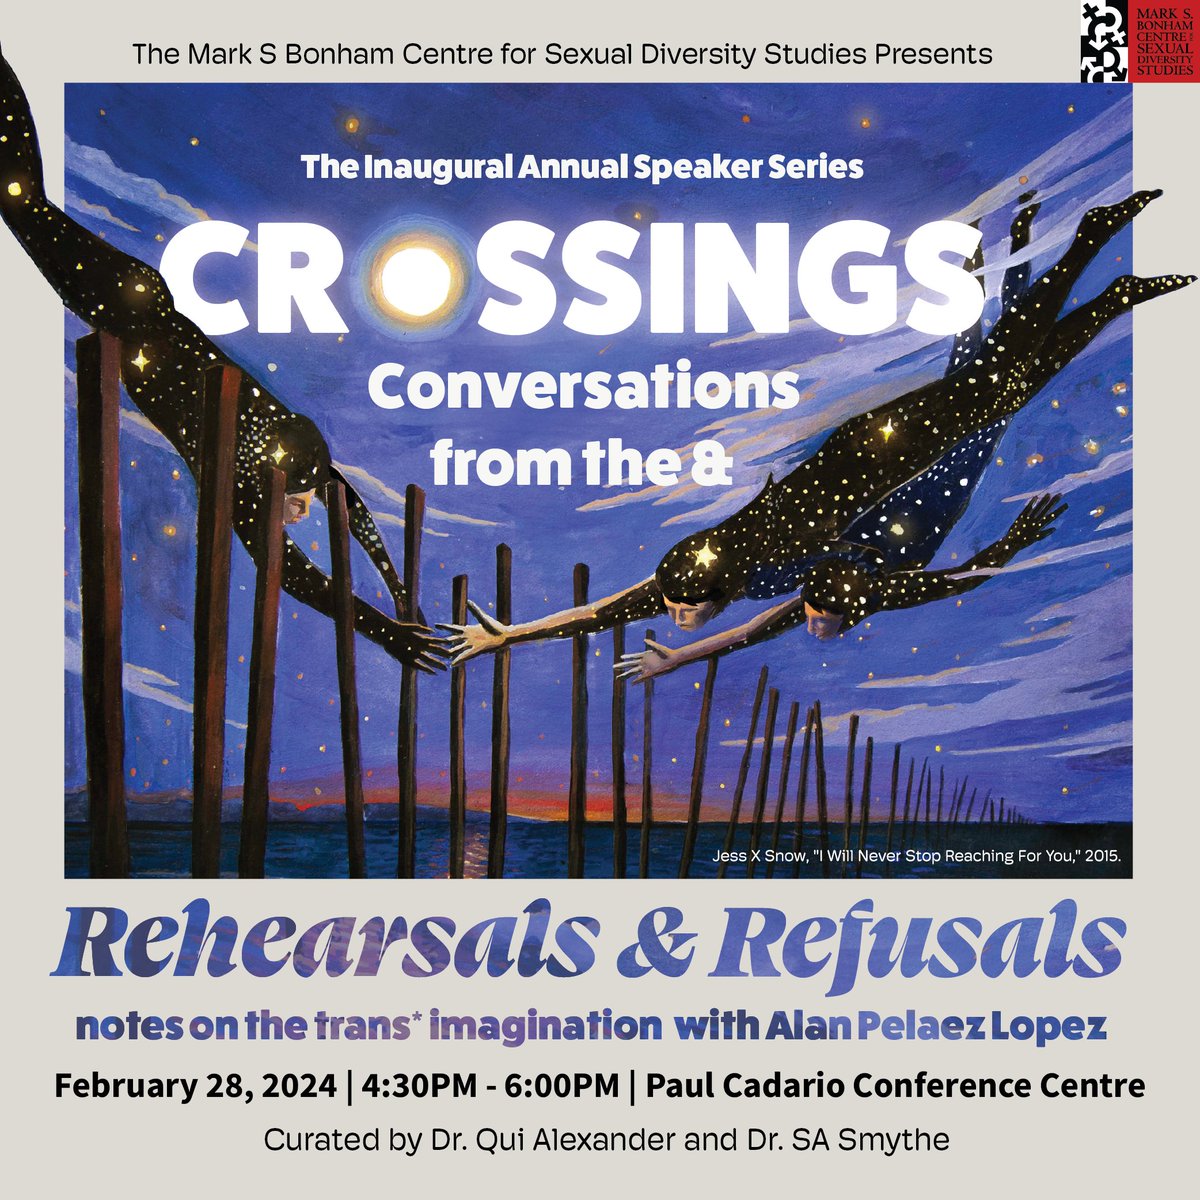 Join us on February 28th, 2024 for the inaugural lecture in our new speaker series Crossings: Conversations from the &, with Afro-Indigenous poet, artist, and theorist Dr. Alan Pelaez Lopez (@MigrantScribble). Register at uoft.me/crossings2024